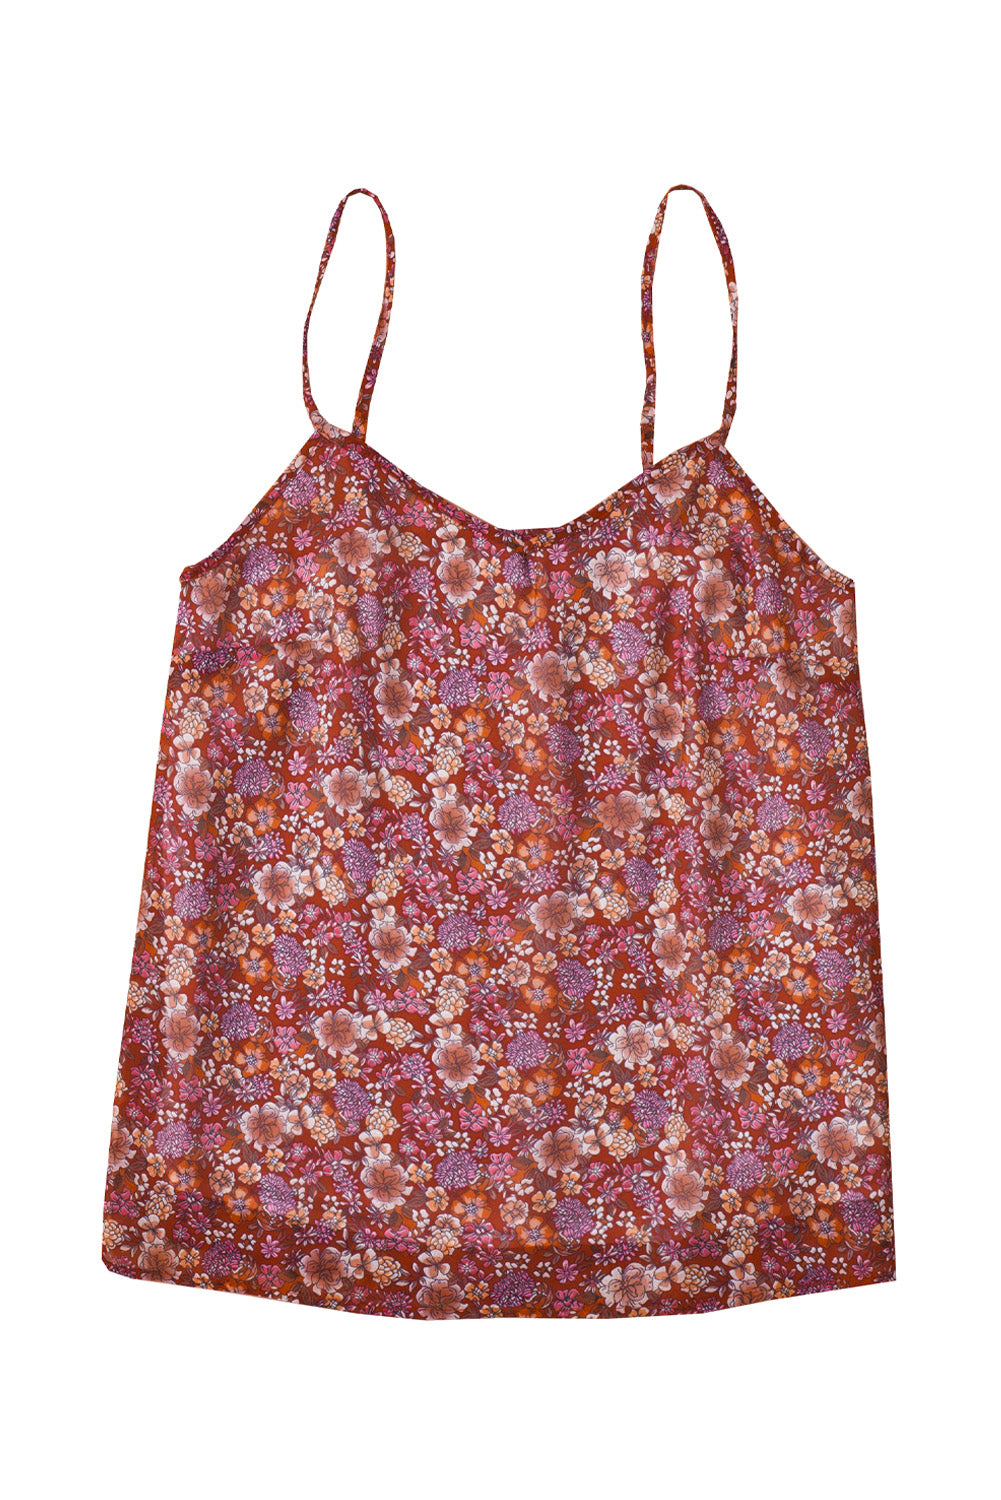 Fiery Red Floral Print Loose Spaghetti Strap Cami Top Tank Tops JT's Designer Fashion